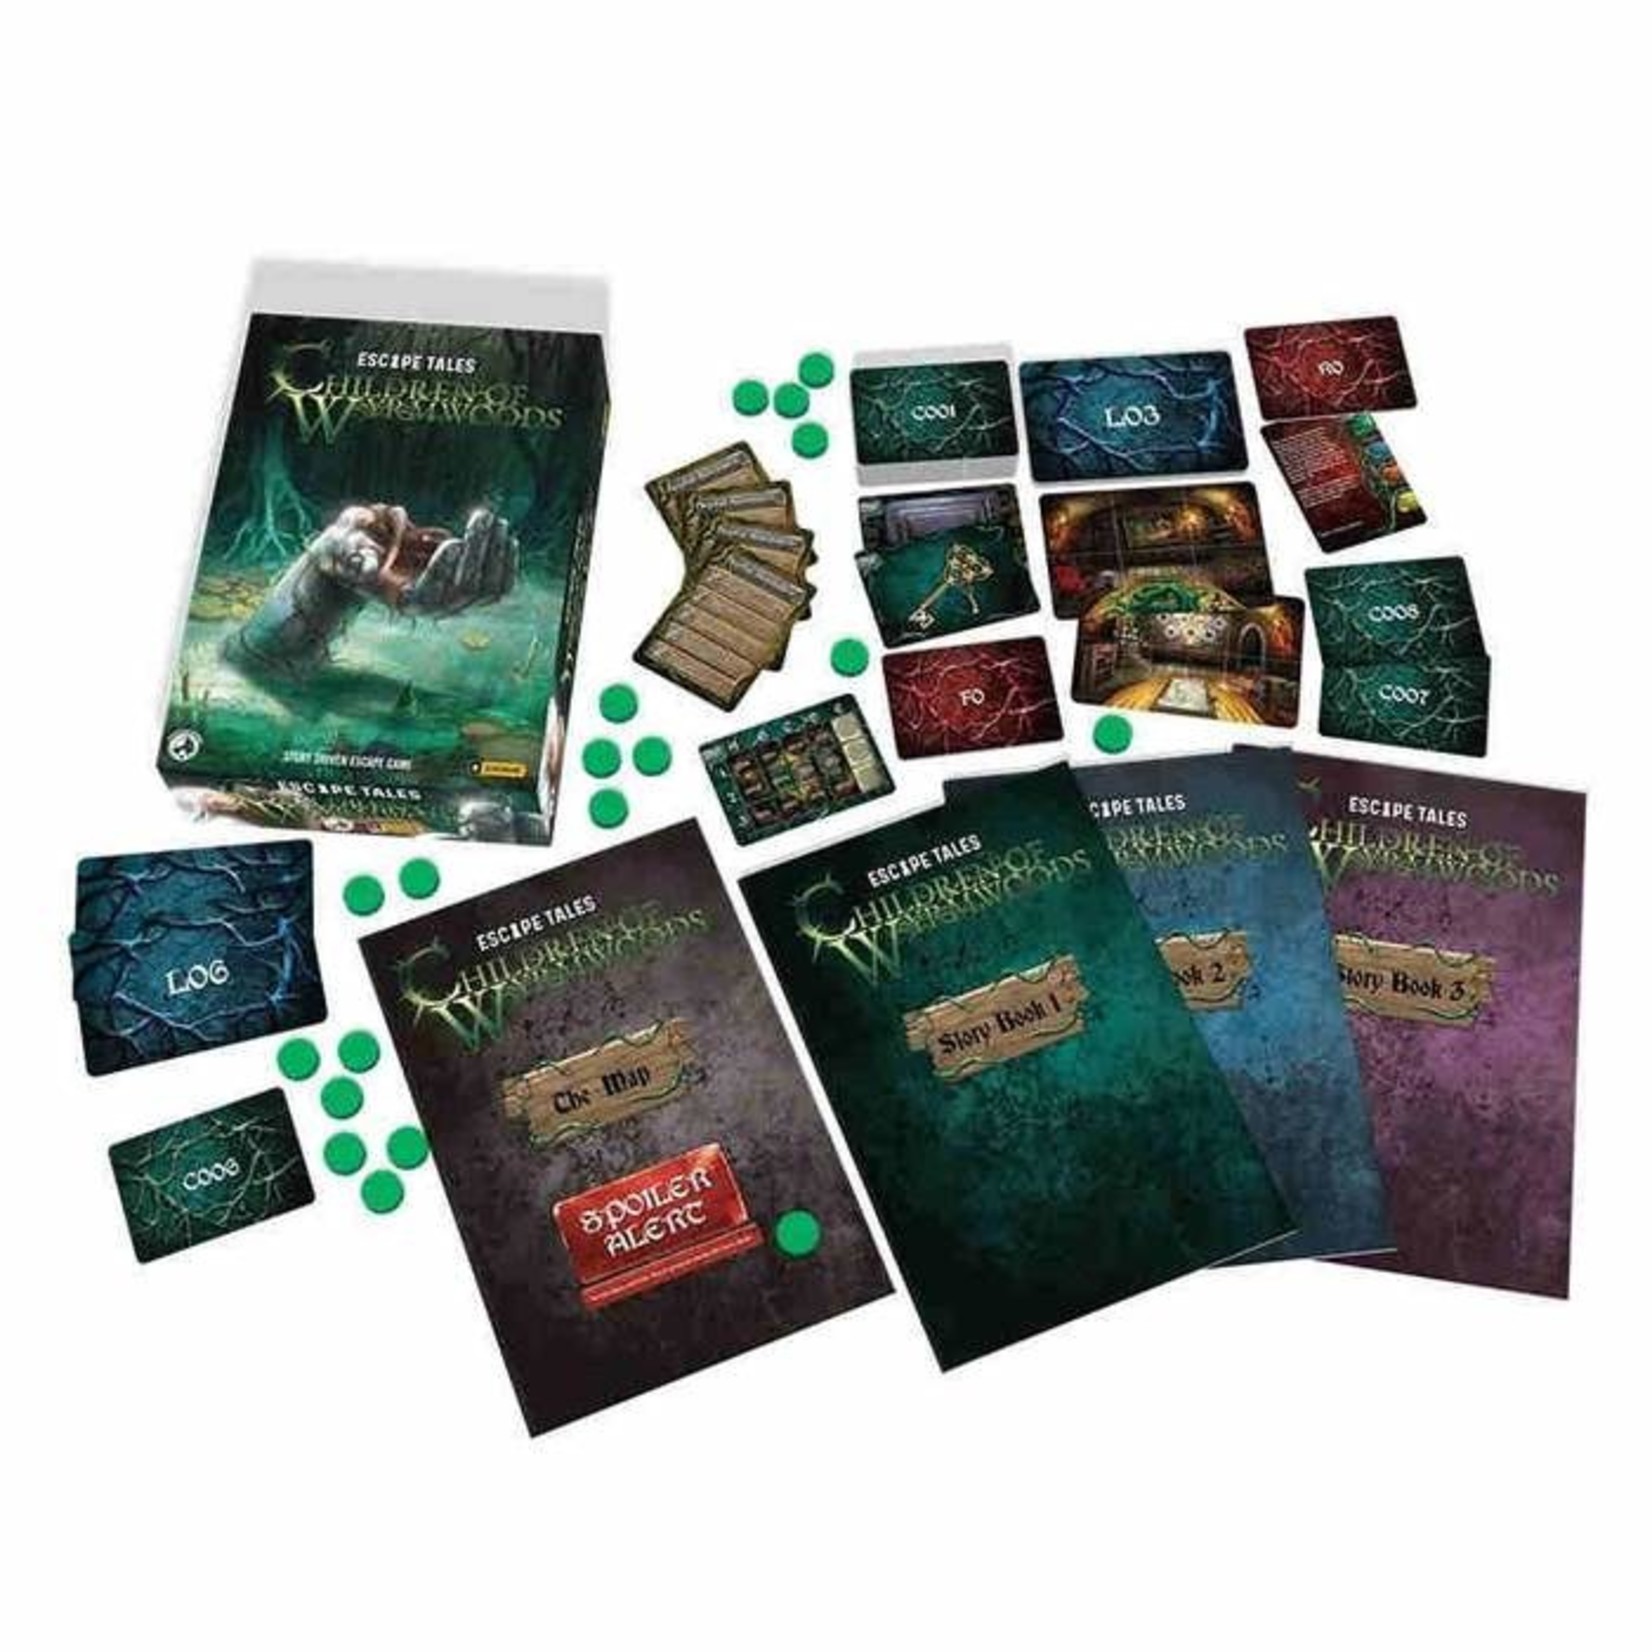 Board and Dice Escape Tales: Children of Wyrmwoods